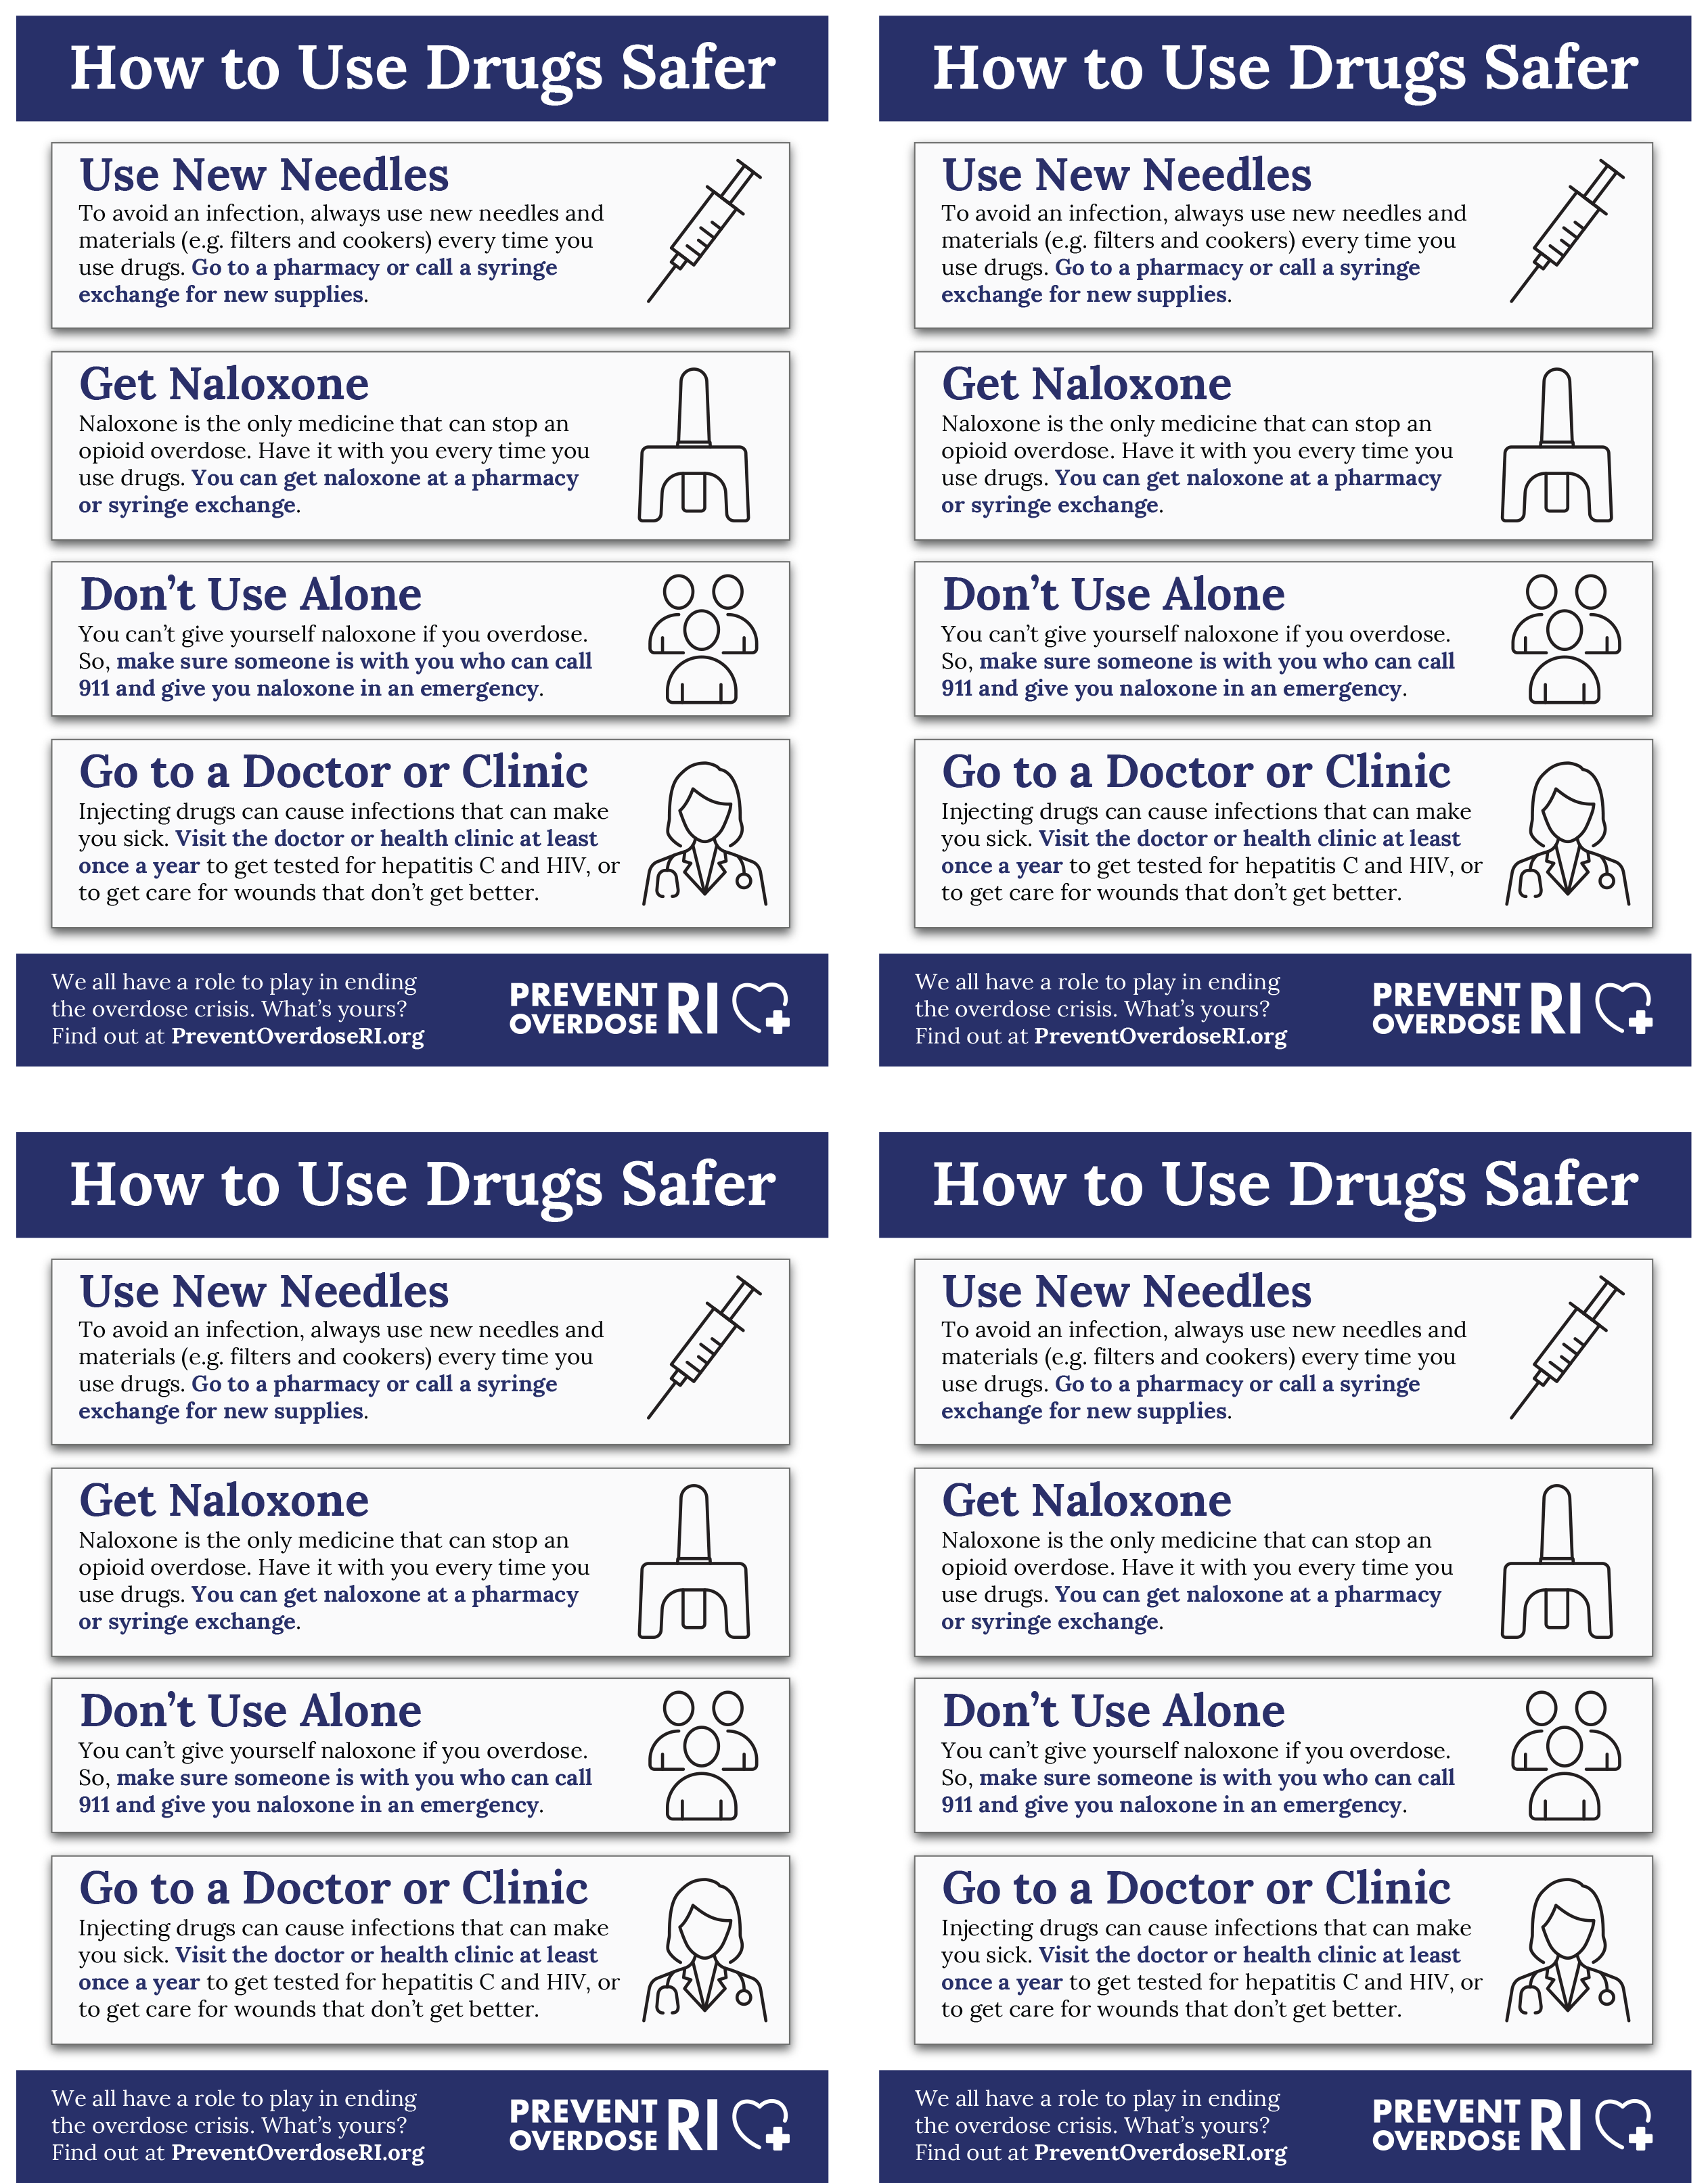 How to Use Drugs Safer